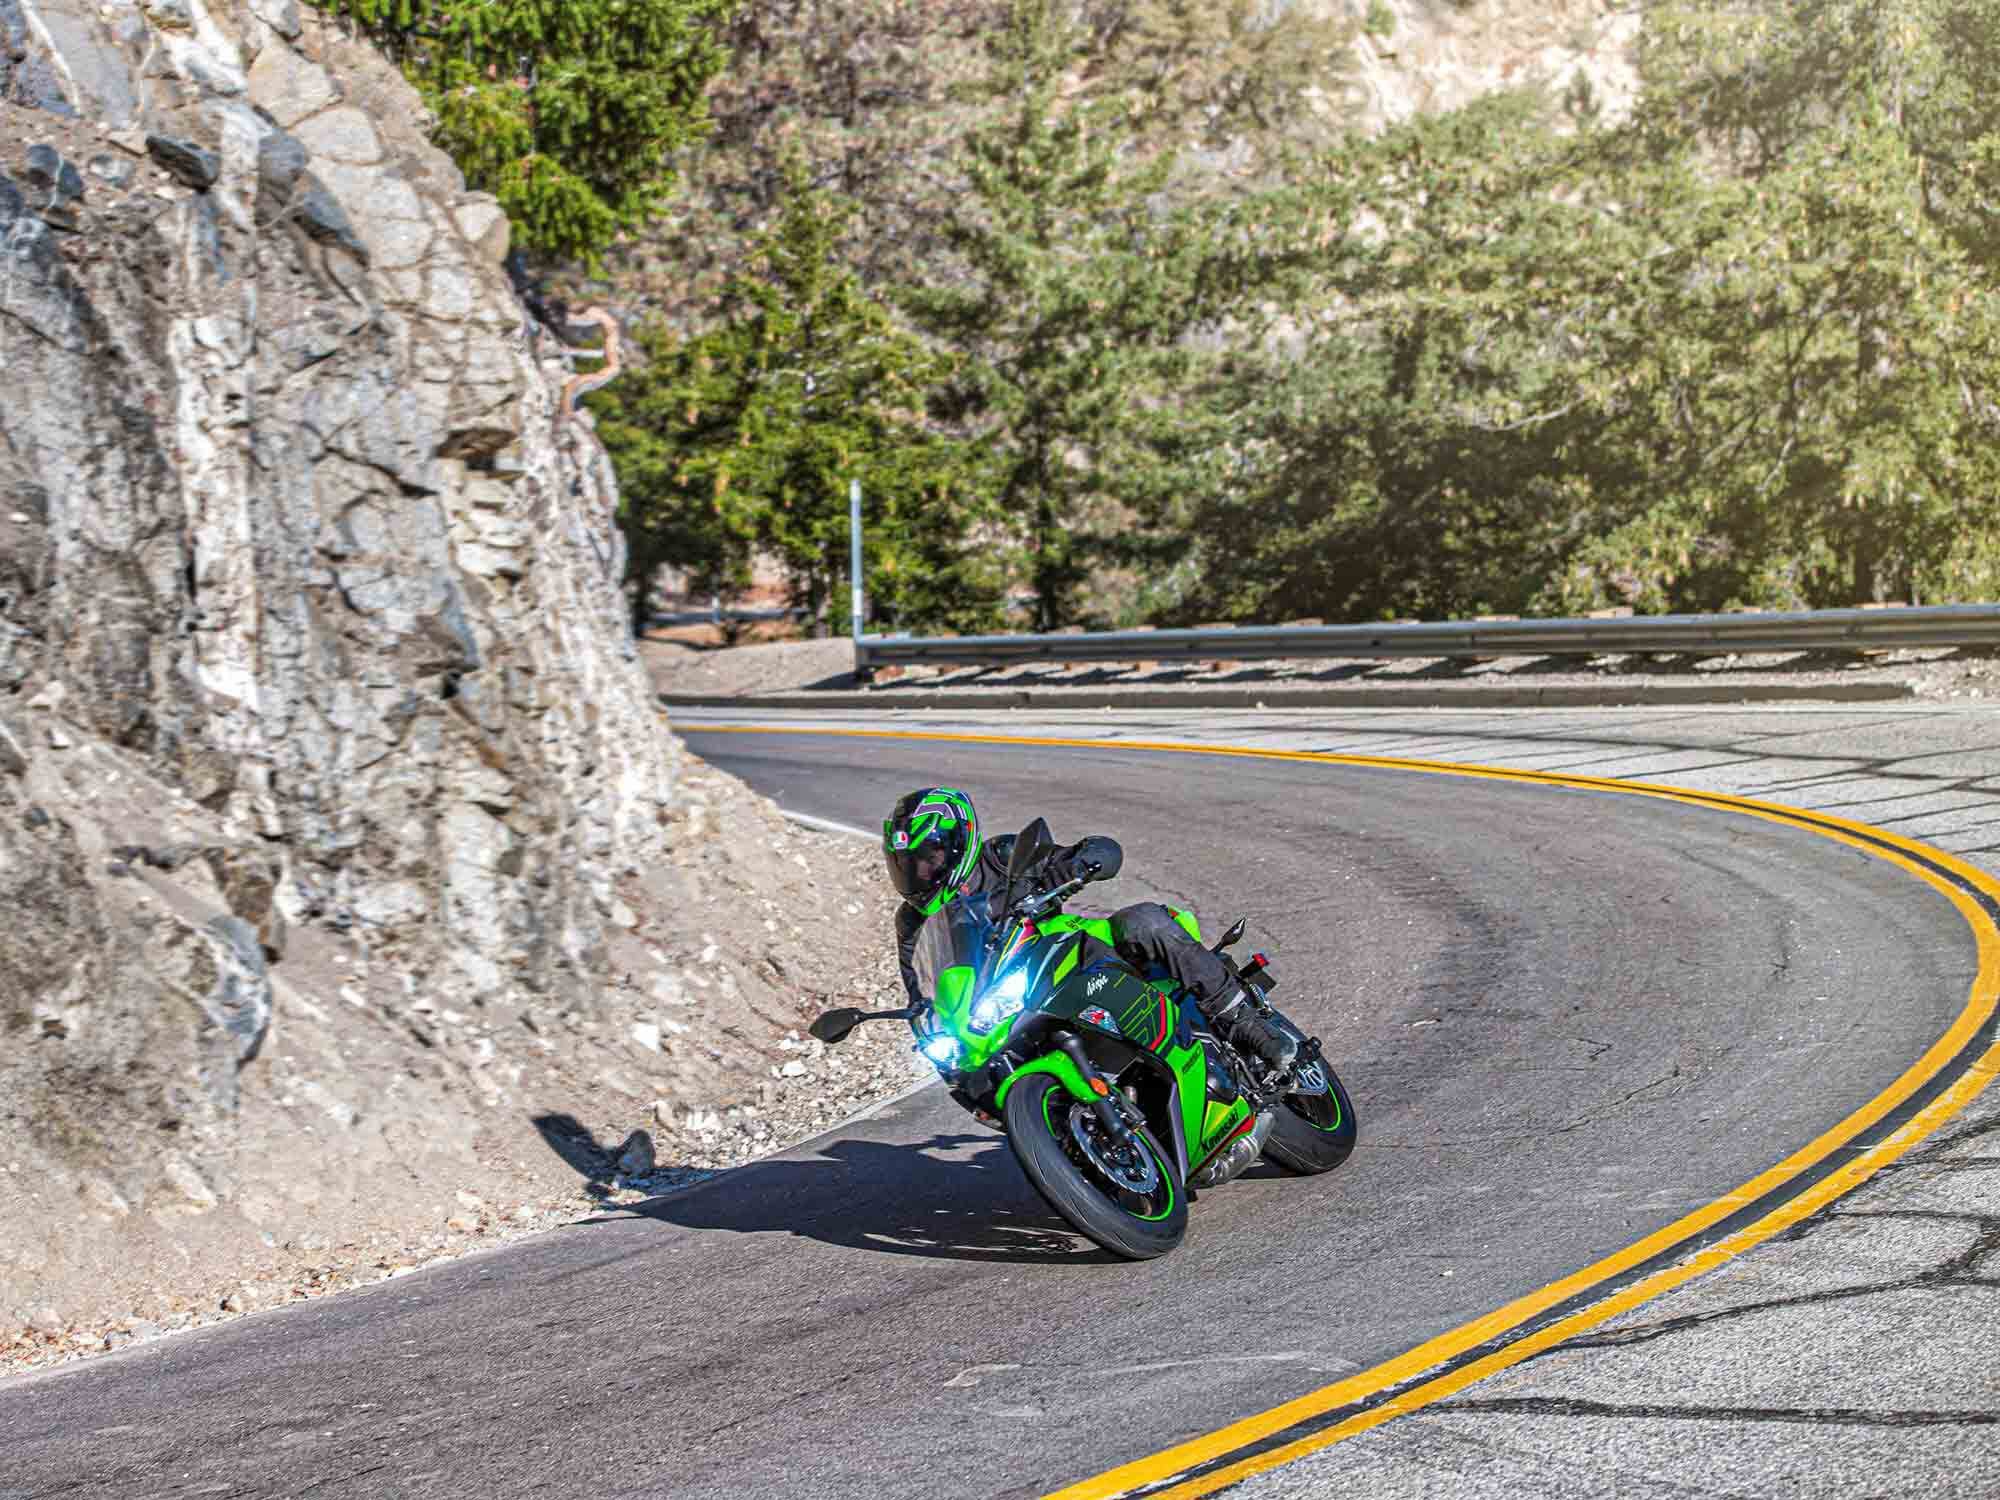 The new Ninja now has traction control to help the rider and bike maintain control on a variety of surfaces.